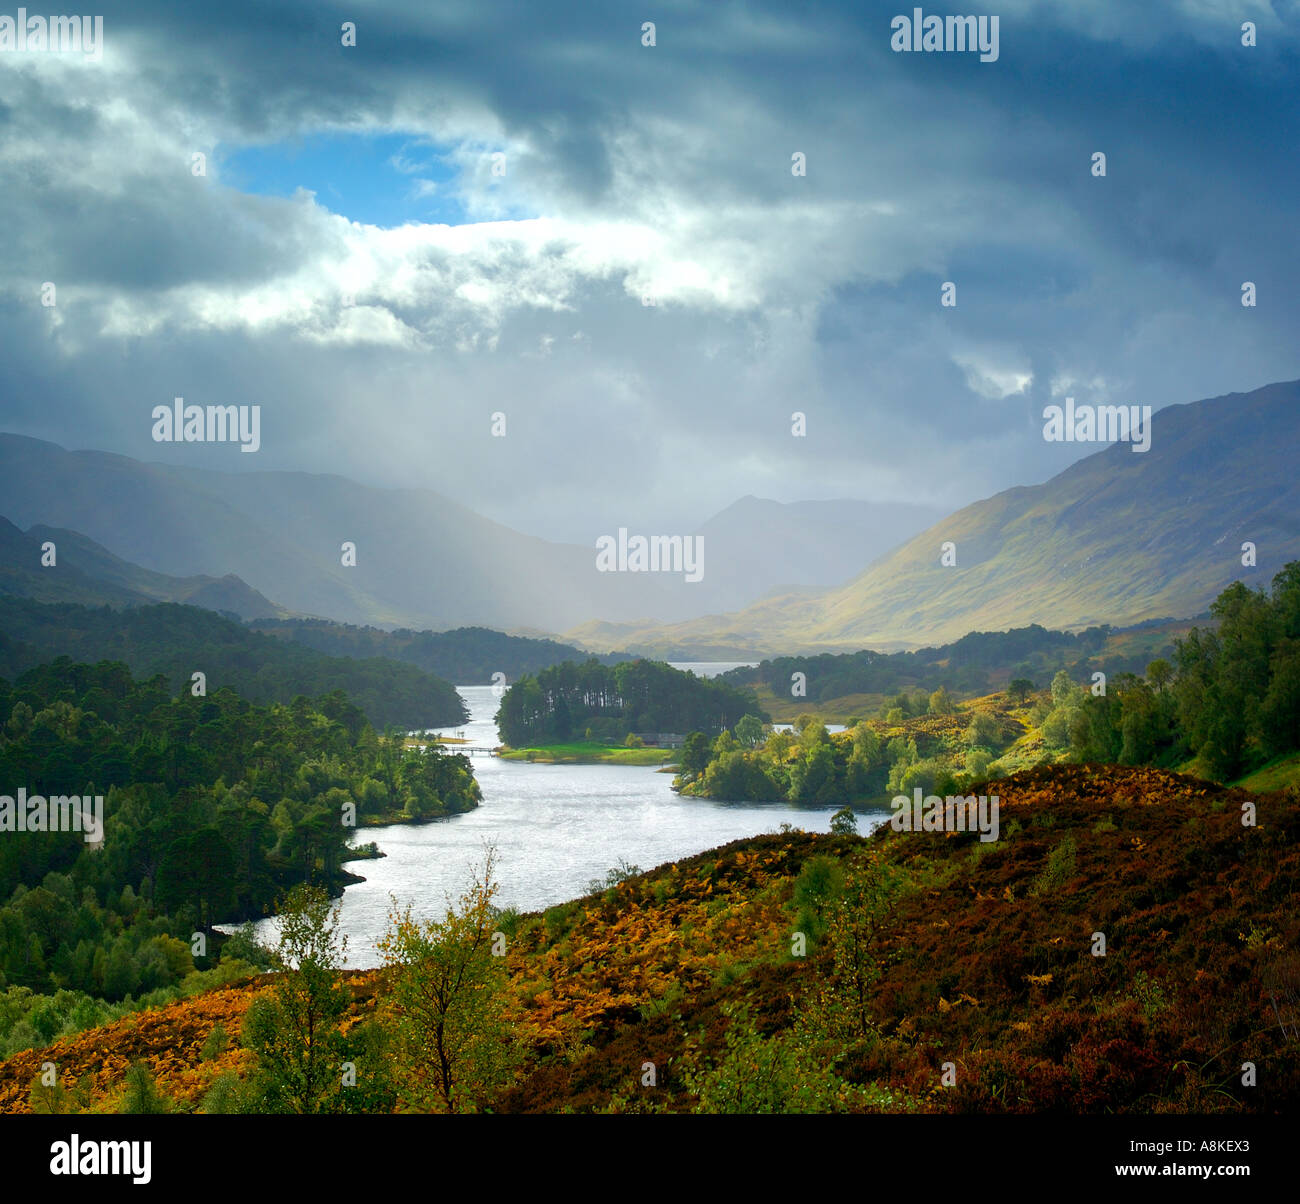 View over Loch Affric Scottish Highlands during stormy weather Stock Photo